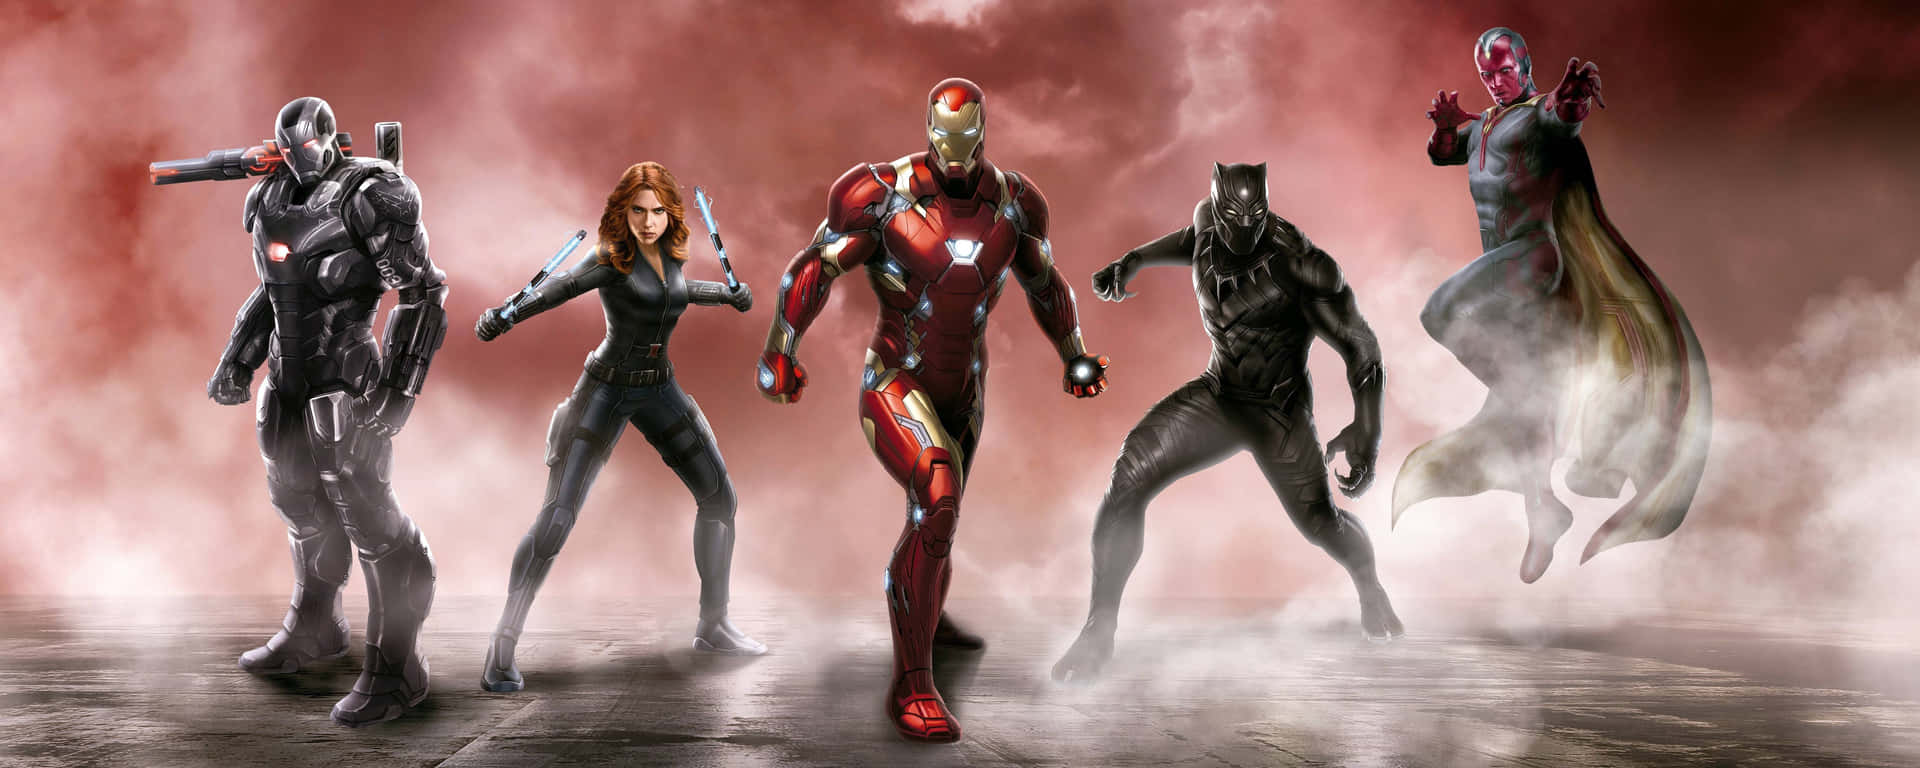 Dare To Be a Hero with the New Avengers Dual Screen! Wallpaper